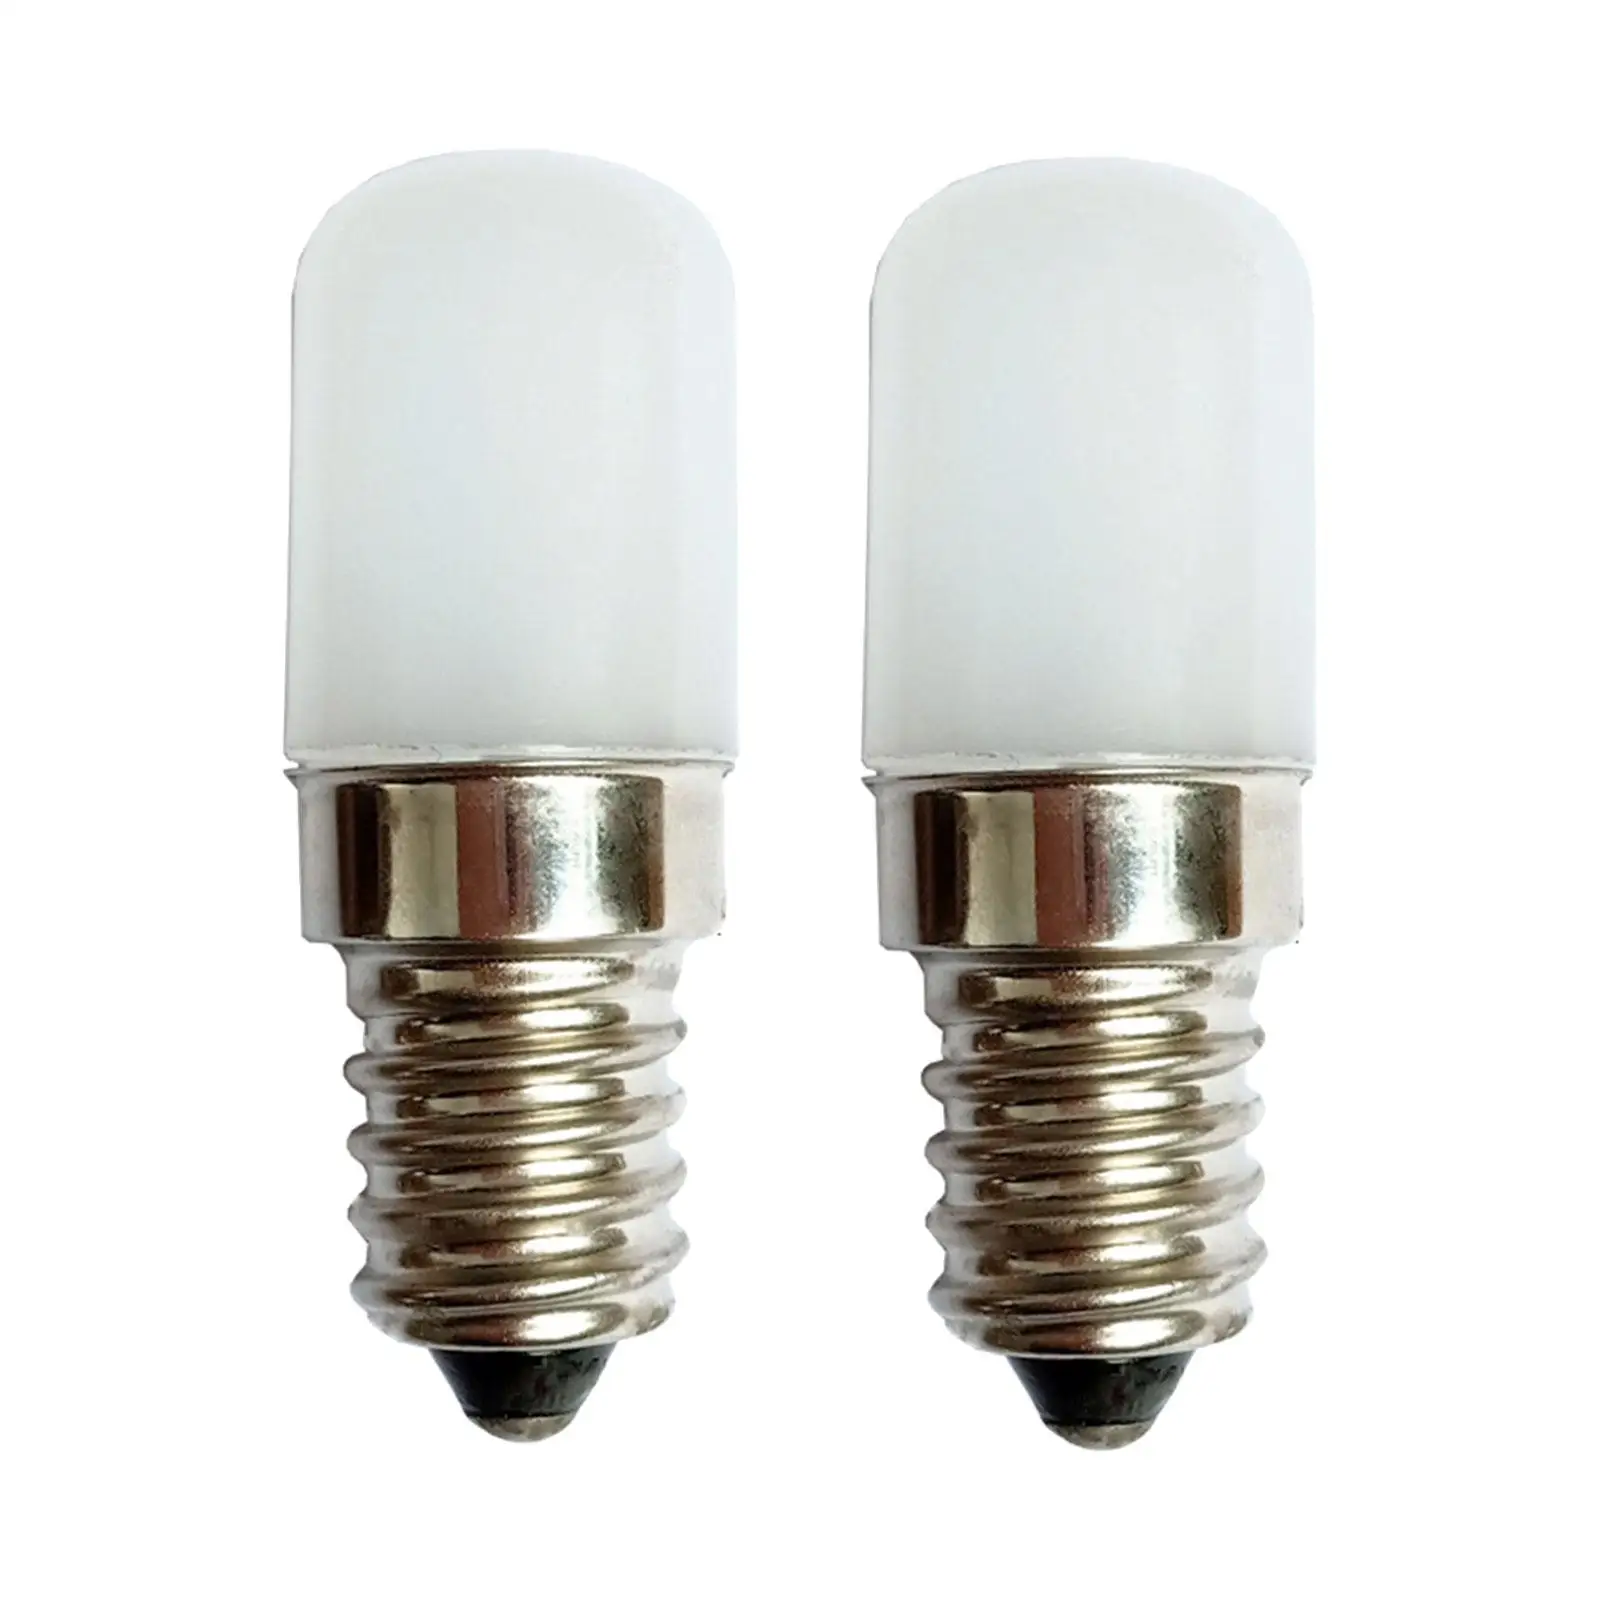 2 Pieces Refrigerator Cabinet Light Replacement Bulb Spare Parts Durable Replacement Small Light Bulb for Home Refrigerator Part